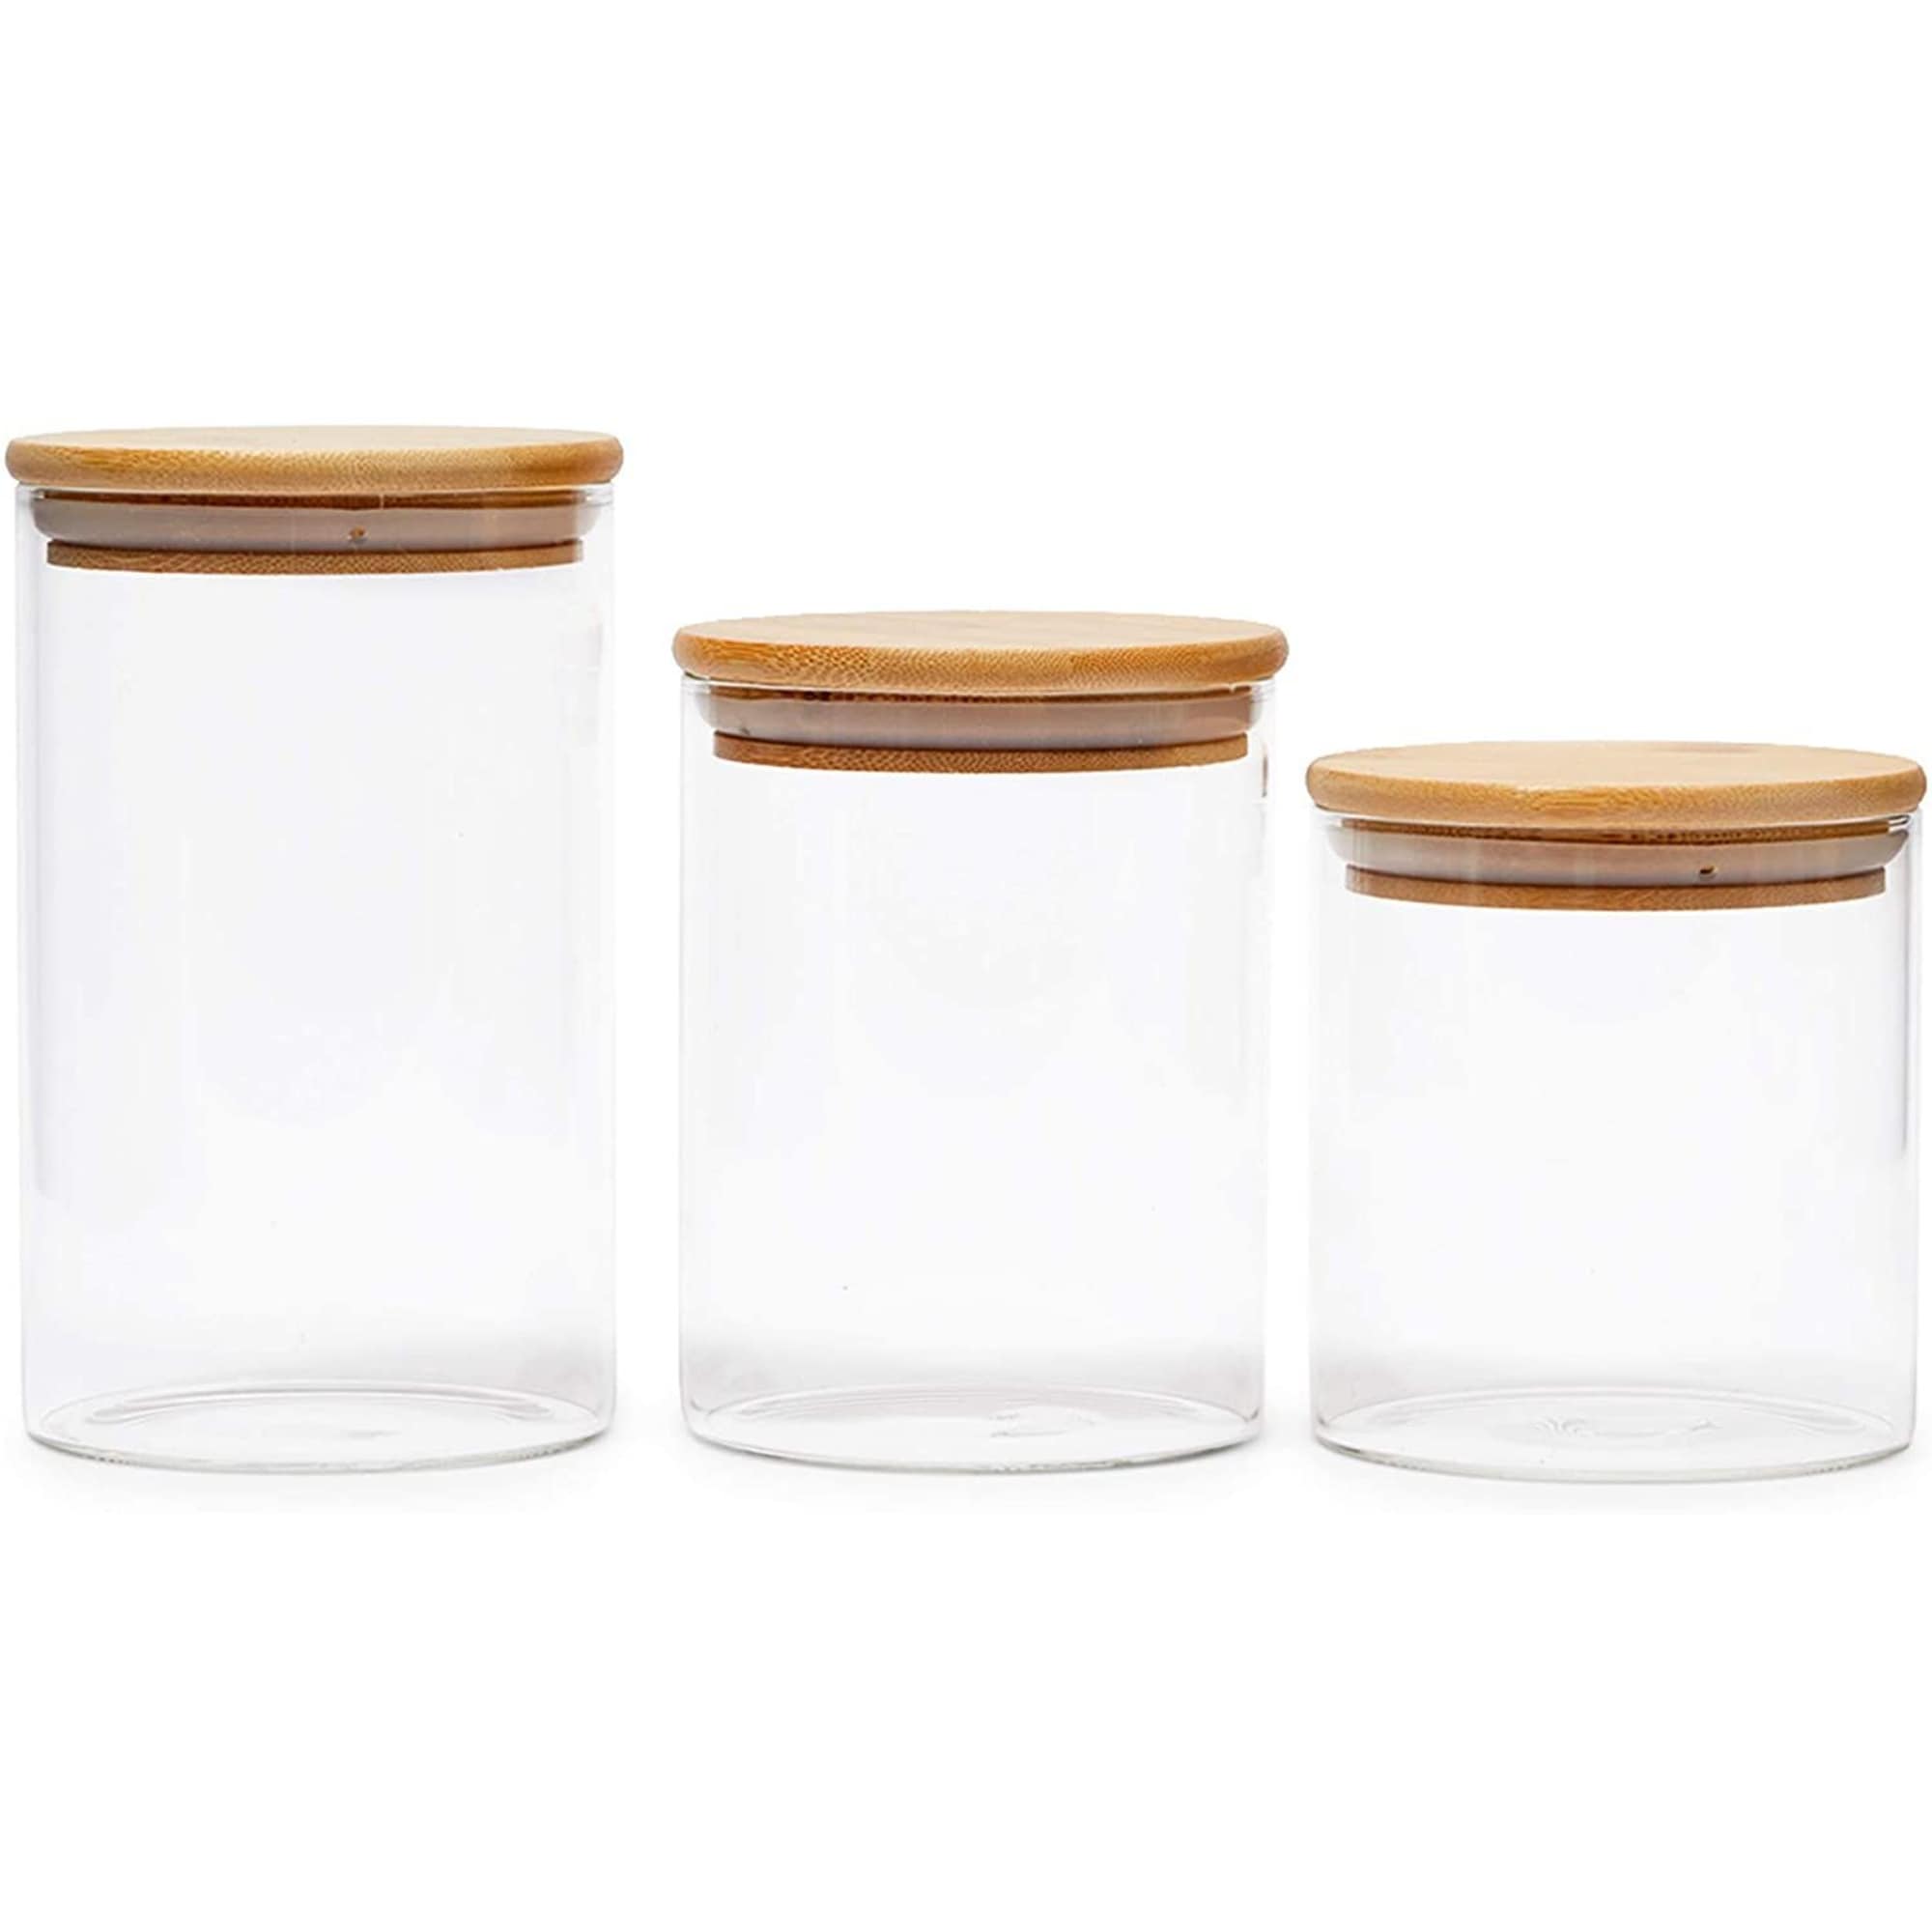 https://ak1.ostkcdn.com/images/products/is/images/direct/ec2e6128e2d4b0fbbc972d838ae0e97b6a822298/Glass-Canisters-with-Airtight-Bamboo-Lids%2C-3-Sizes-for-Pantry-Storage-%285-Pack%29.jpg